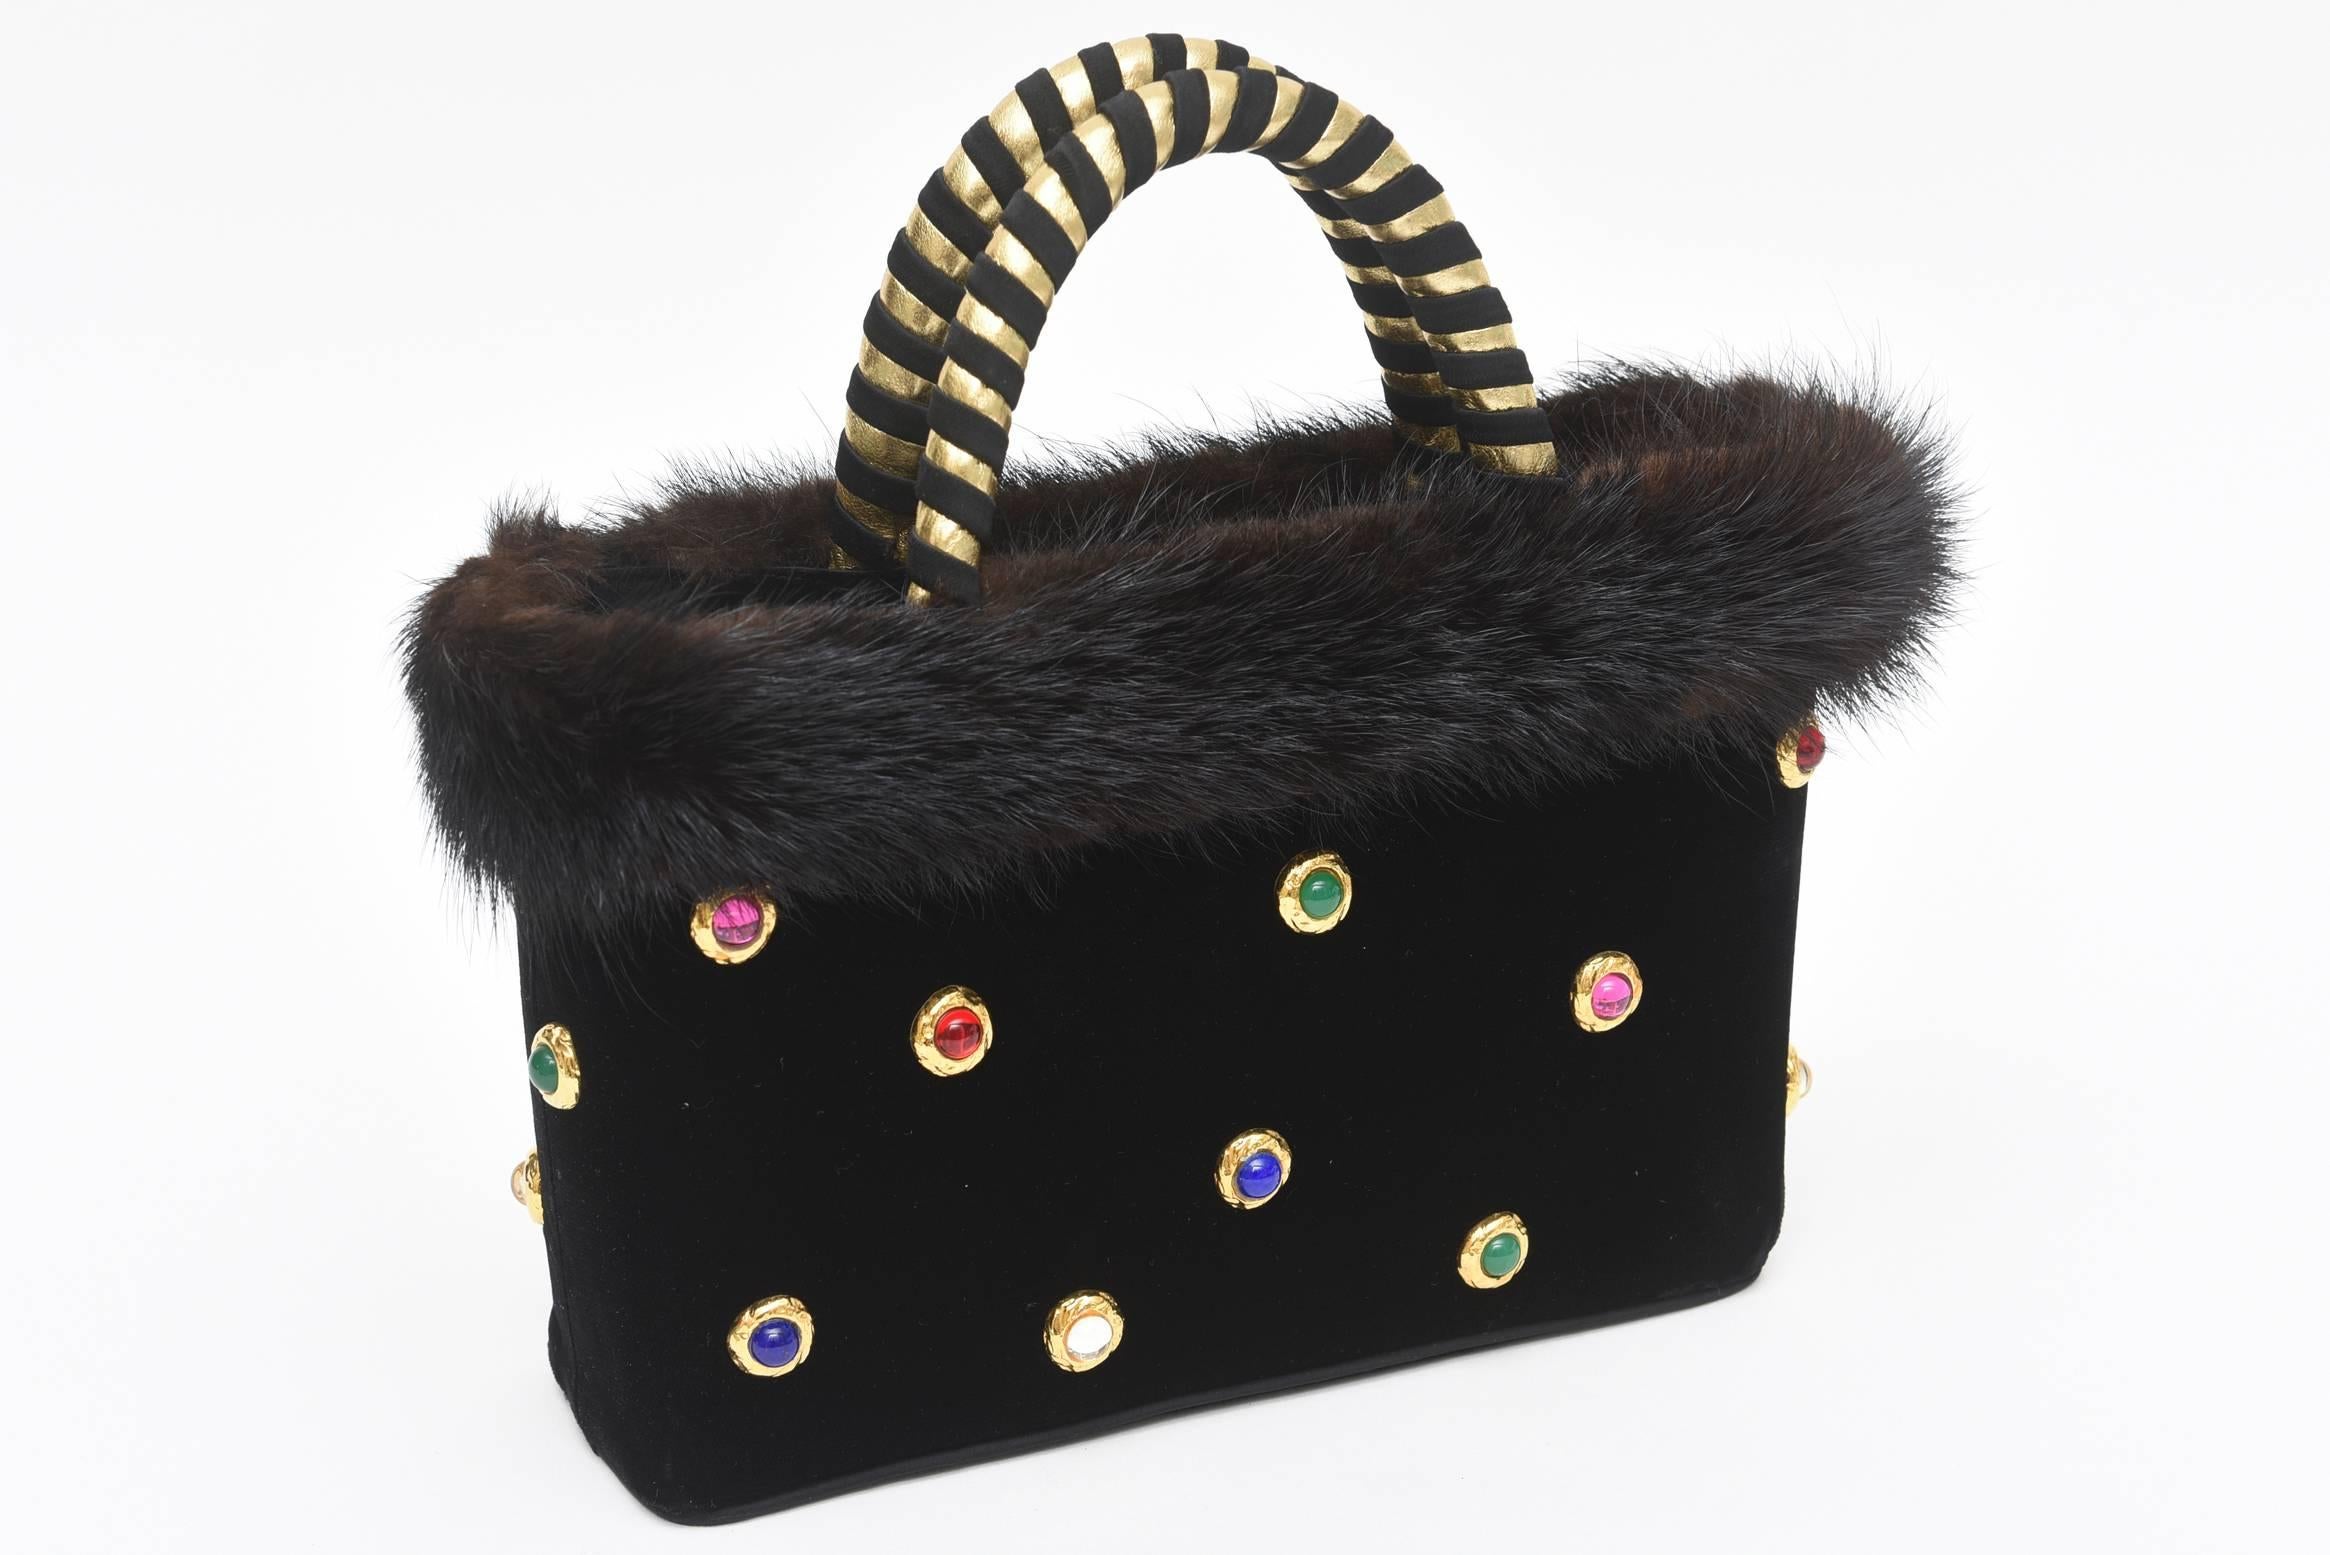 This rare and stellar ensemble set of vintage Givenchy of black doe skin (fine Suede) evening gloves set with colored stones and a velvet matching evening bag set with multi-colored stones will sure make any evening out a conversation place. The bag